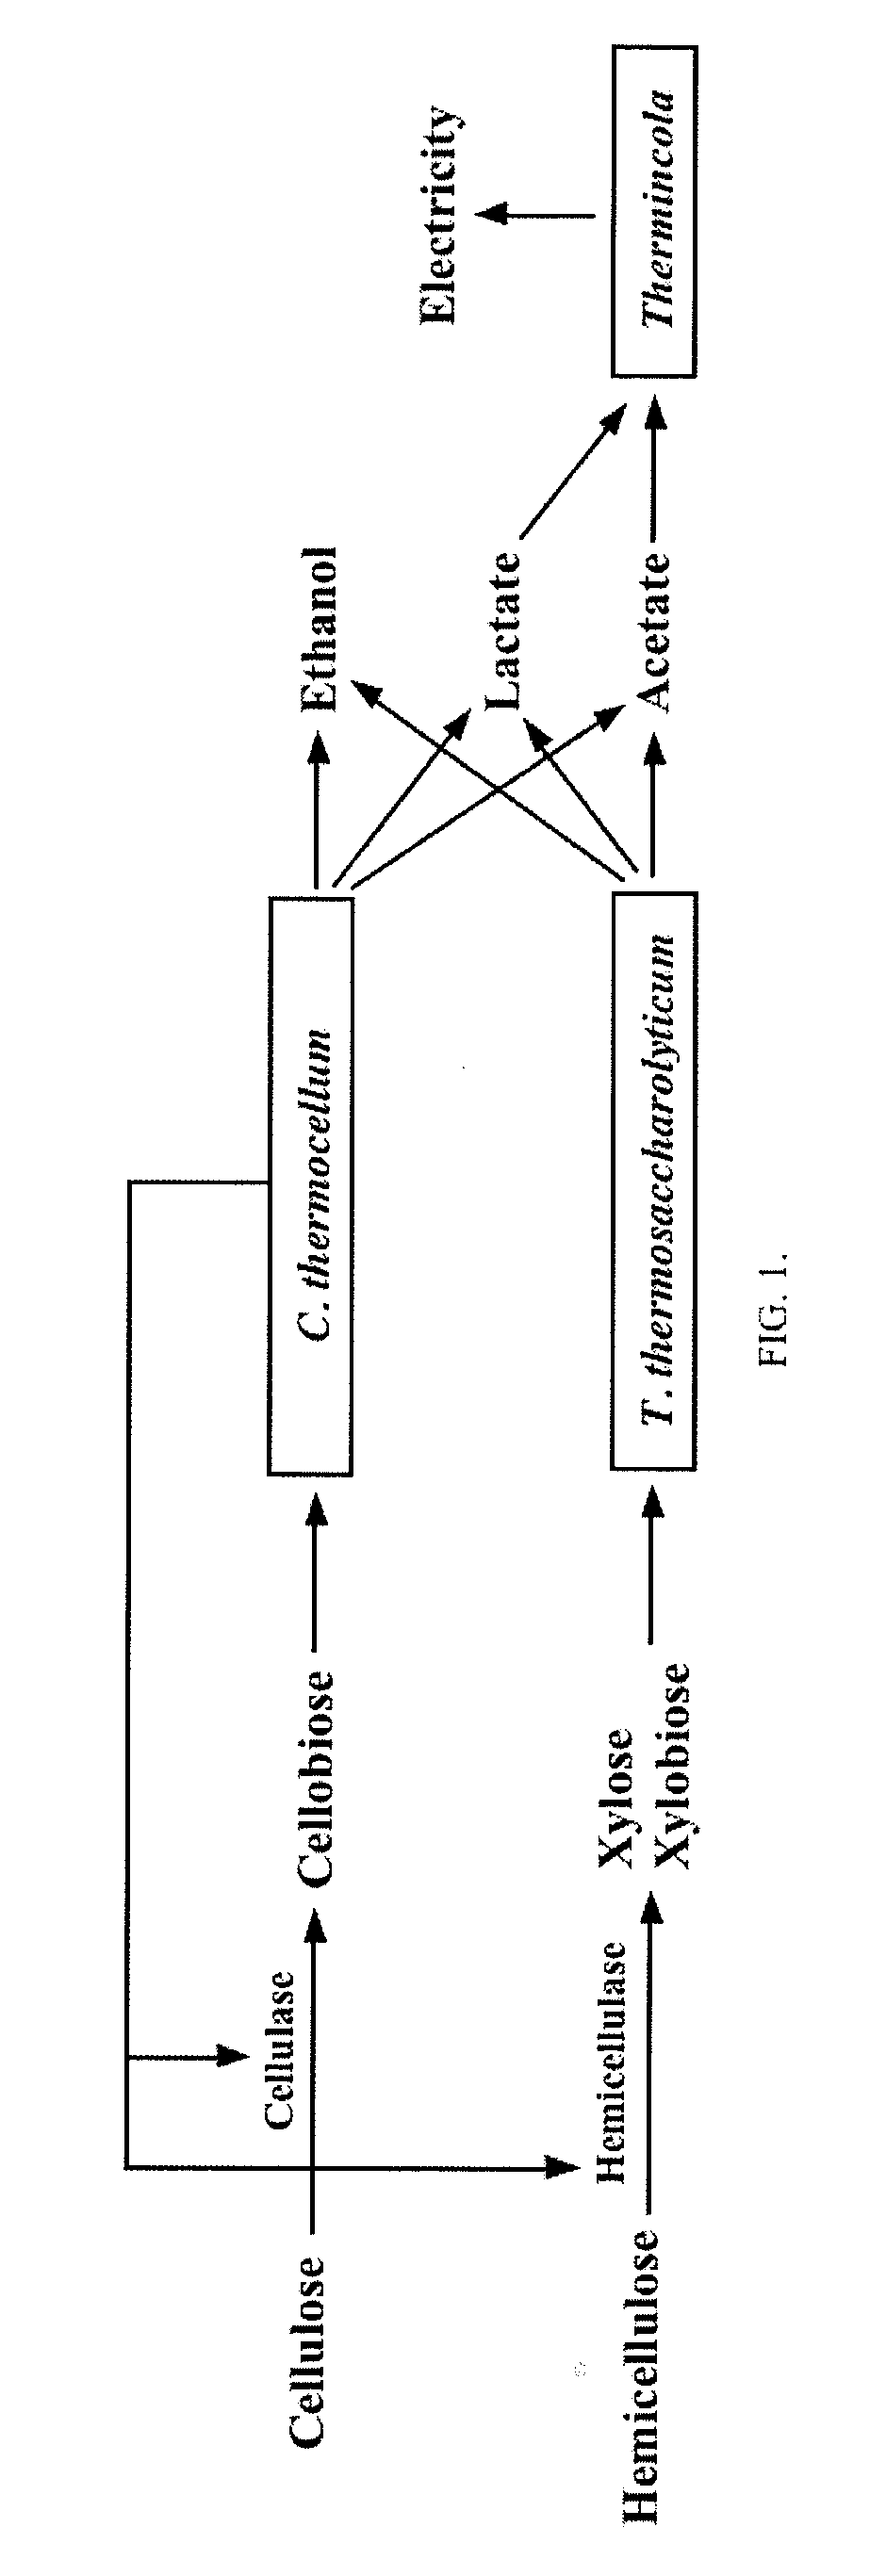 Apparatus and methods for the production of ethanol, hydrogen and electricity